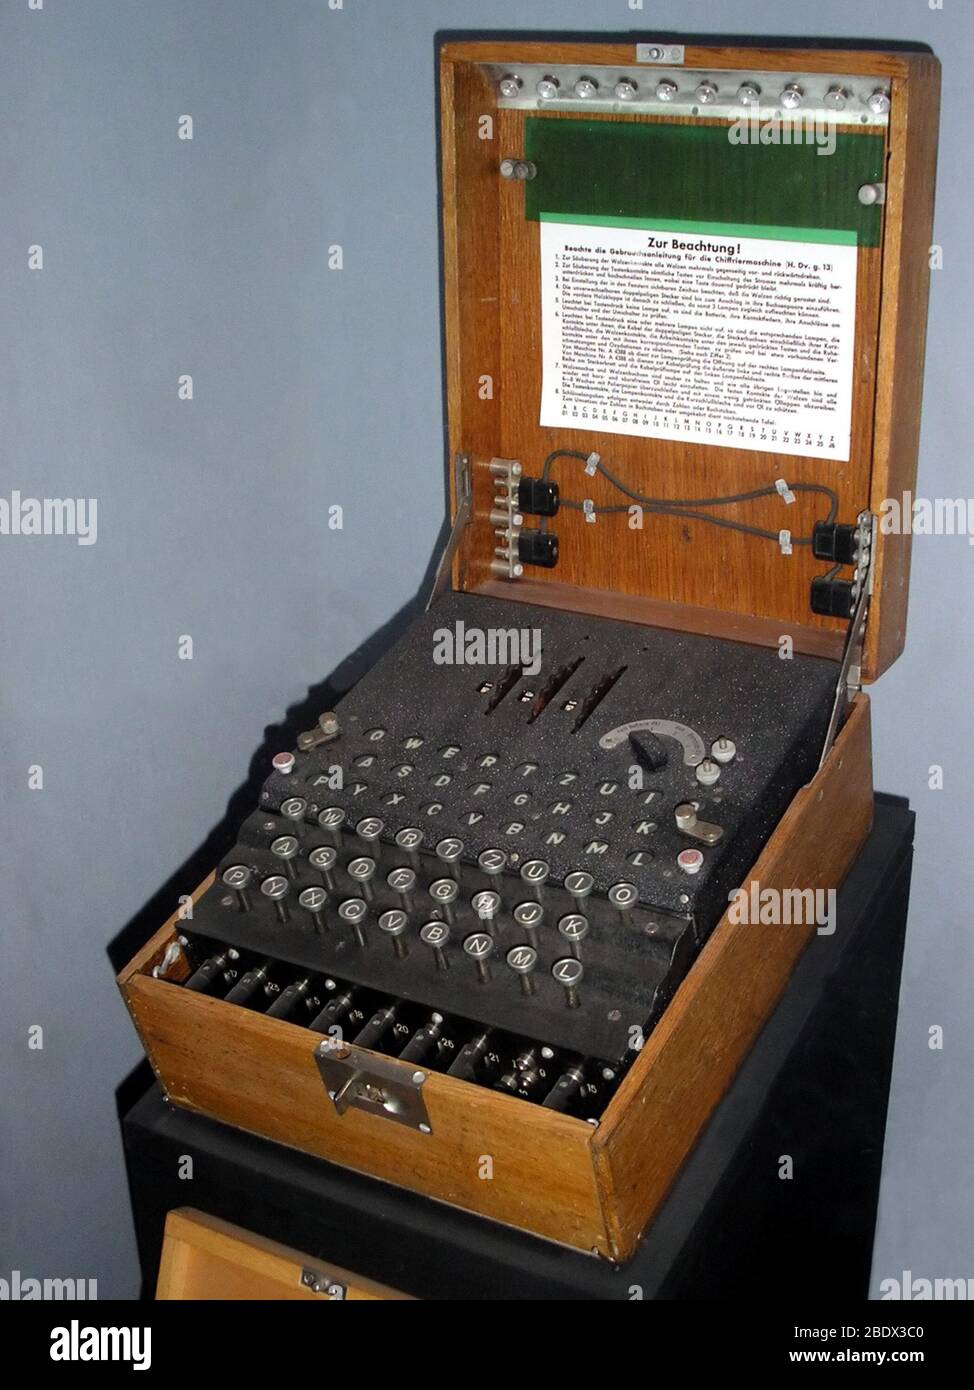 Typex Mk III cypher machine for field use, c. 1945